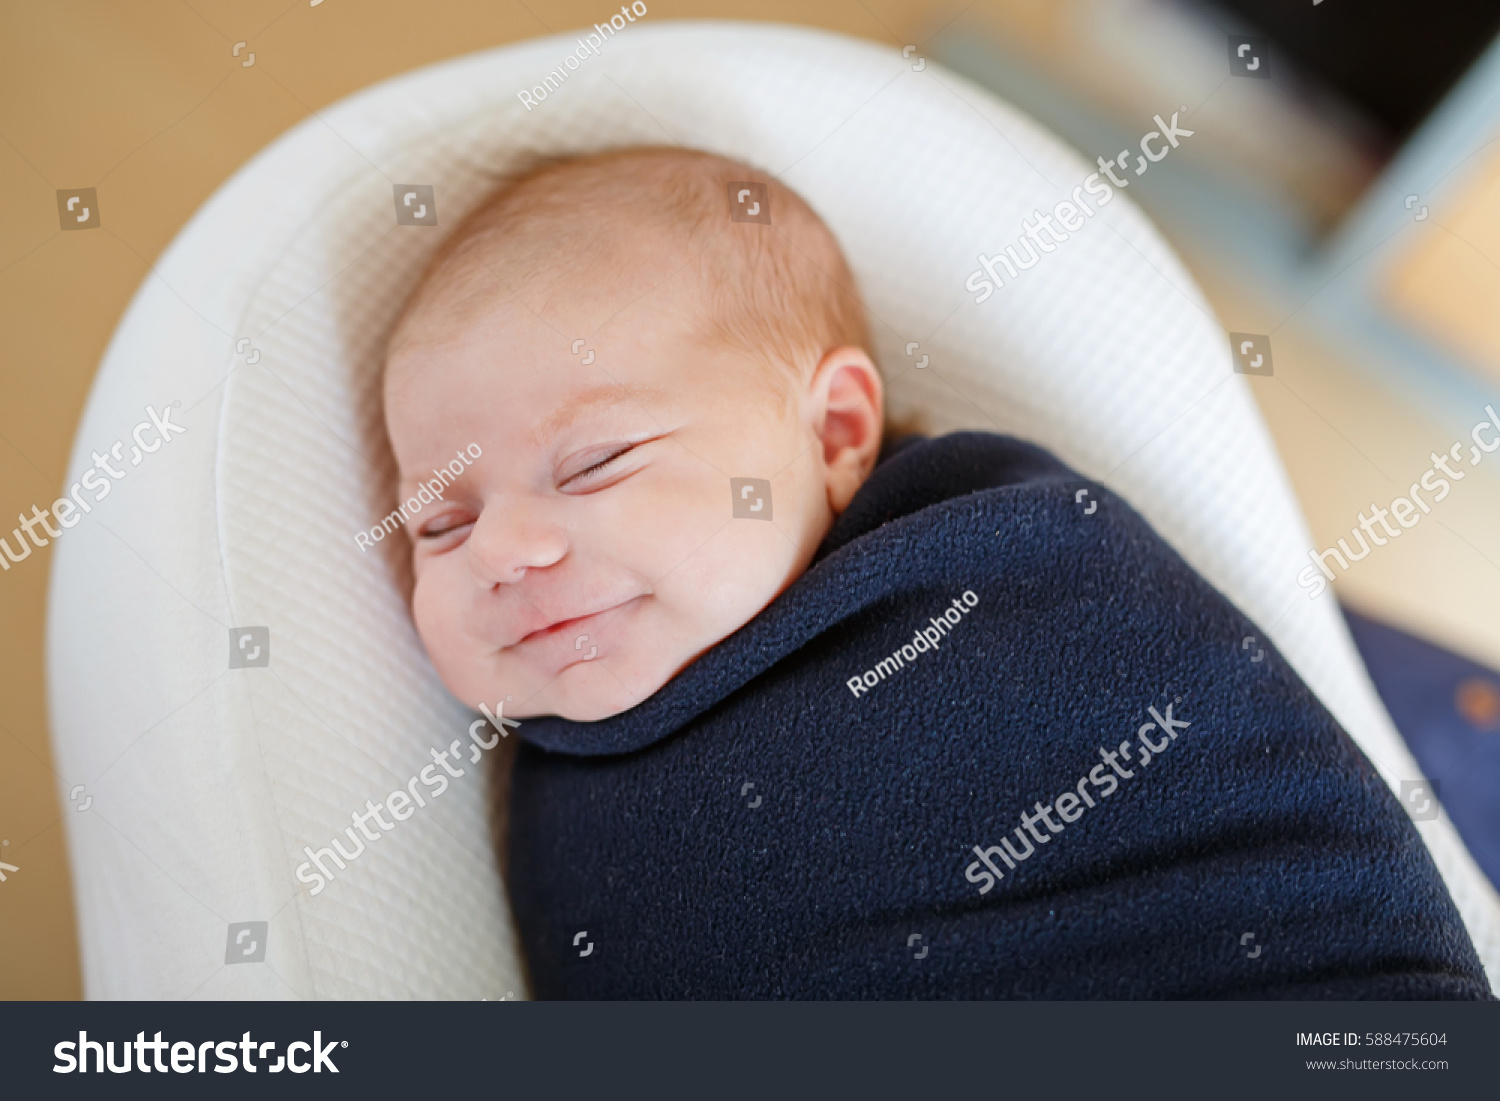 Cute adorable newborn baby wrapped in colorful blanket, sleeping and dreaming. Closeup of peaceful child, little baby girl . Family, Birth, new life. Swaddling as method for calm child #588475604